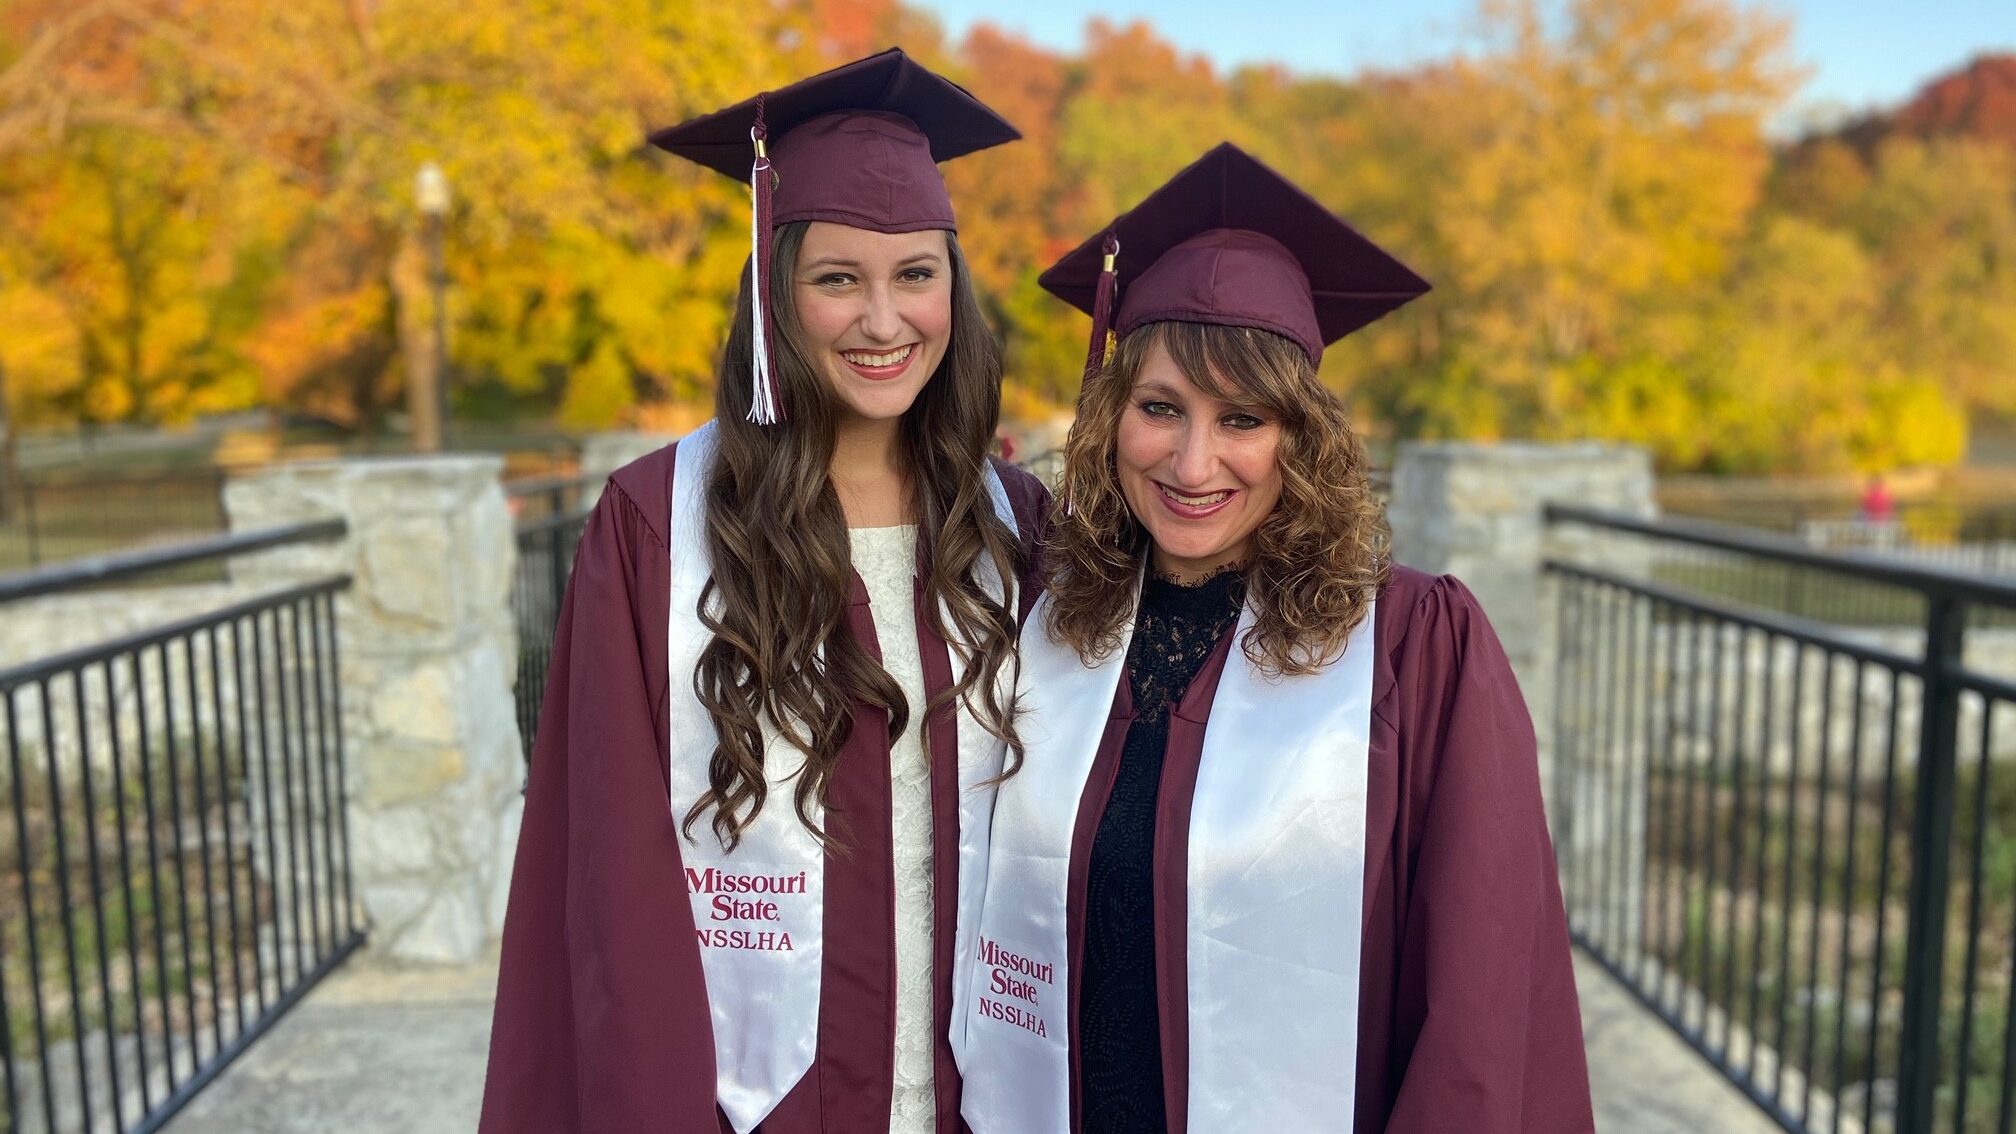 Two women standing in graduation cap and gown